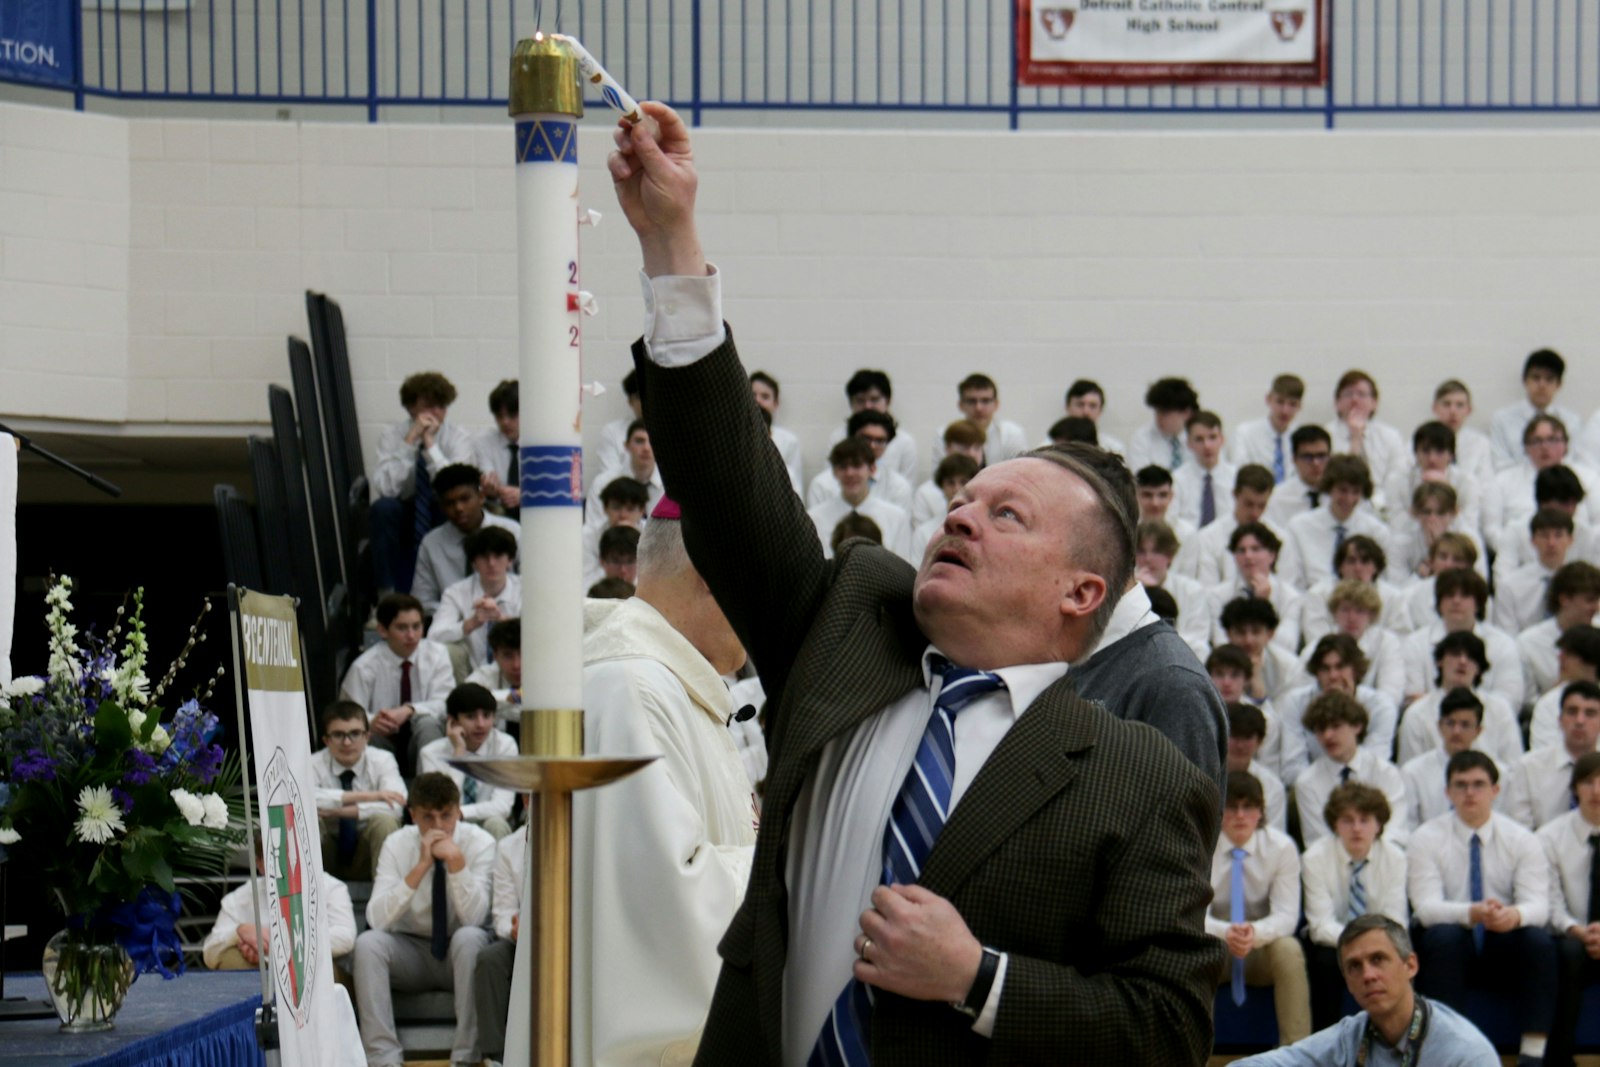 Paul Stuligross, a theology teacher at St. Mary's Preparatory School in Orchard Lake, lights the Easter candle during the Mass at Catholic Central. Stuligross said that theology class is a perfect place to meet students where they are in their faith.